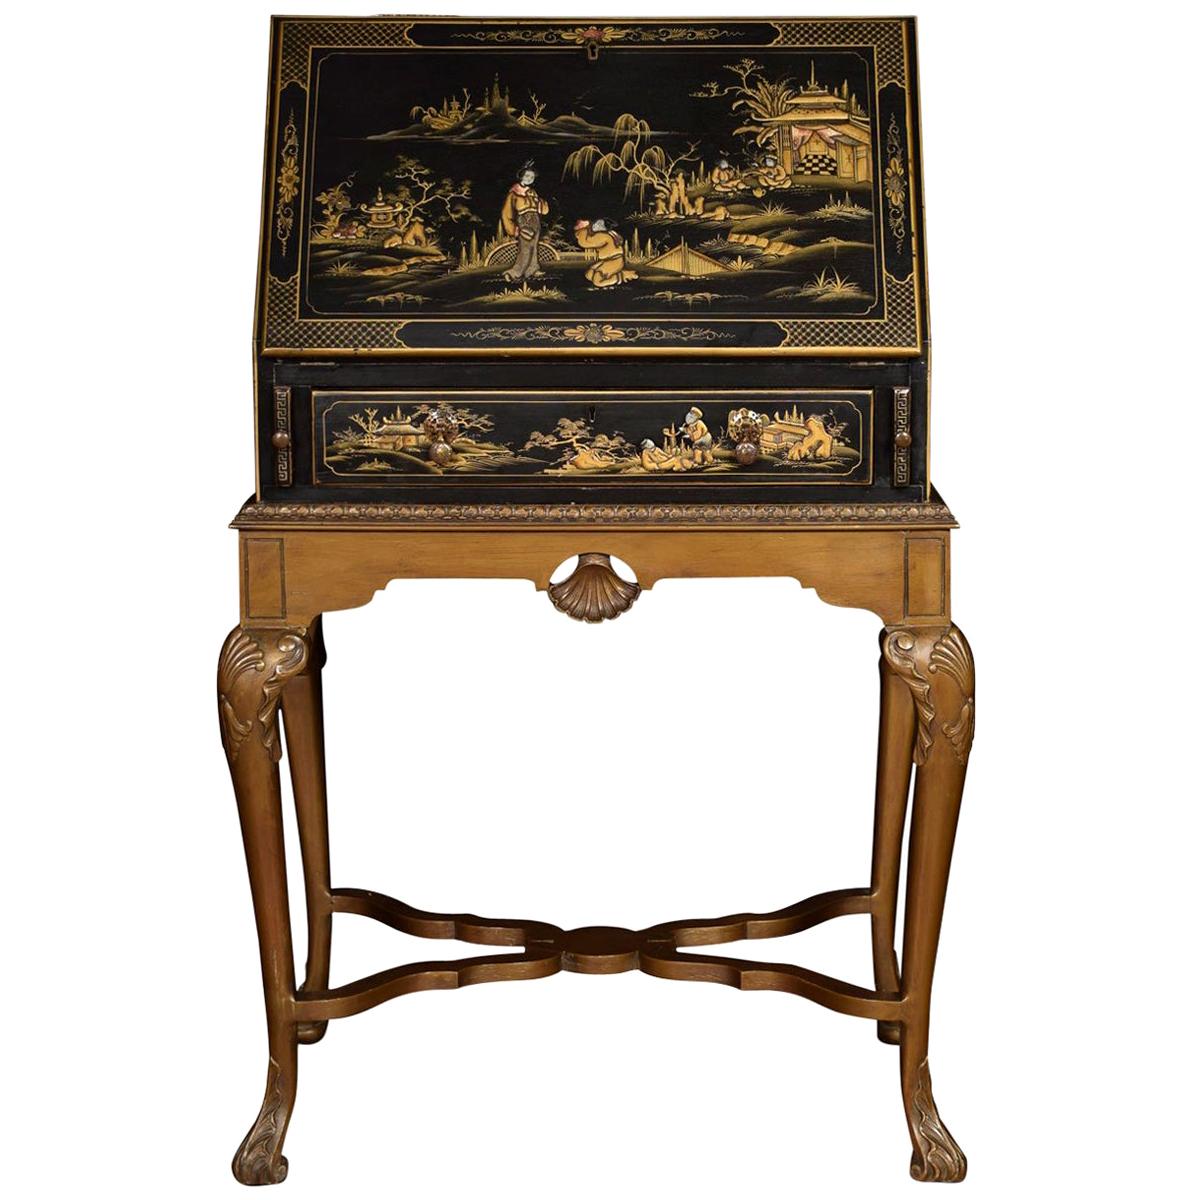 Black Lacquer Chinoiserie Decorated Bureau on Stand